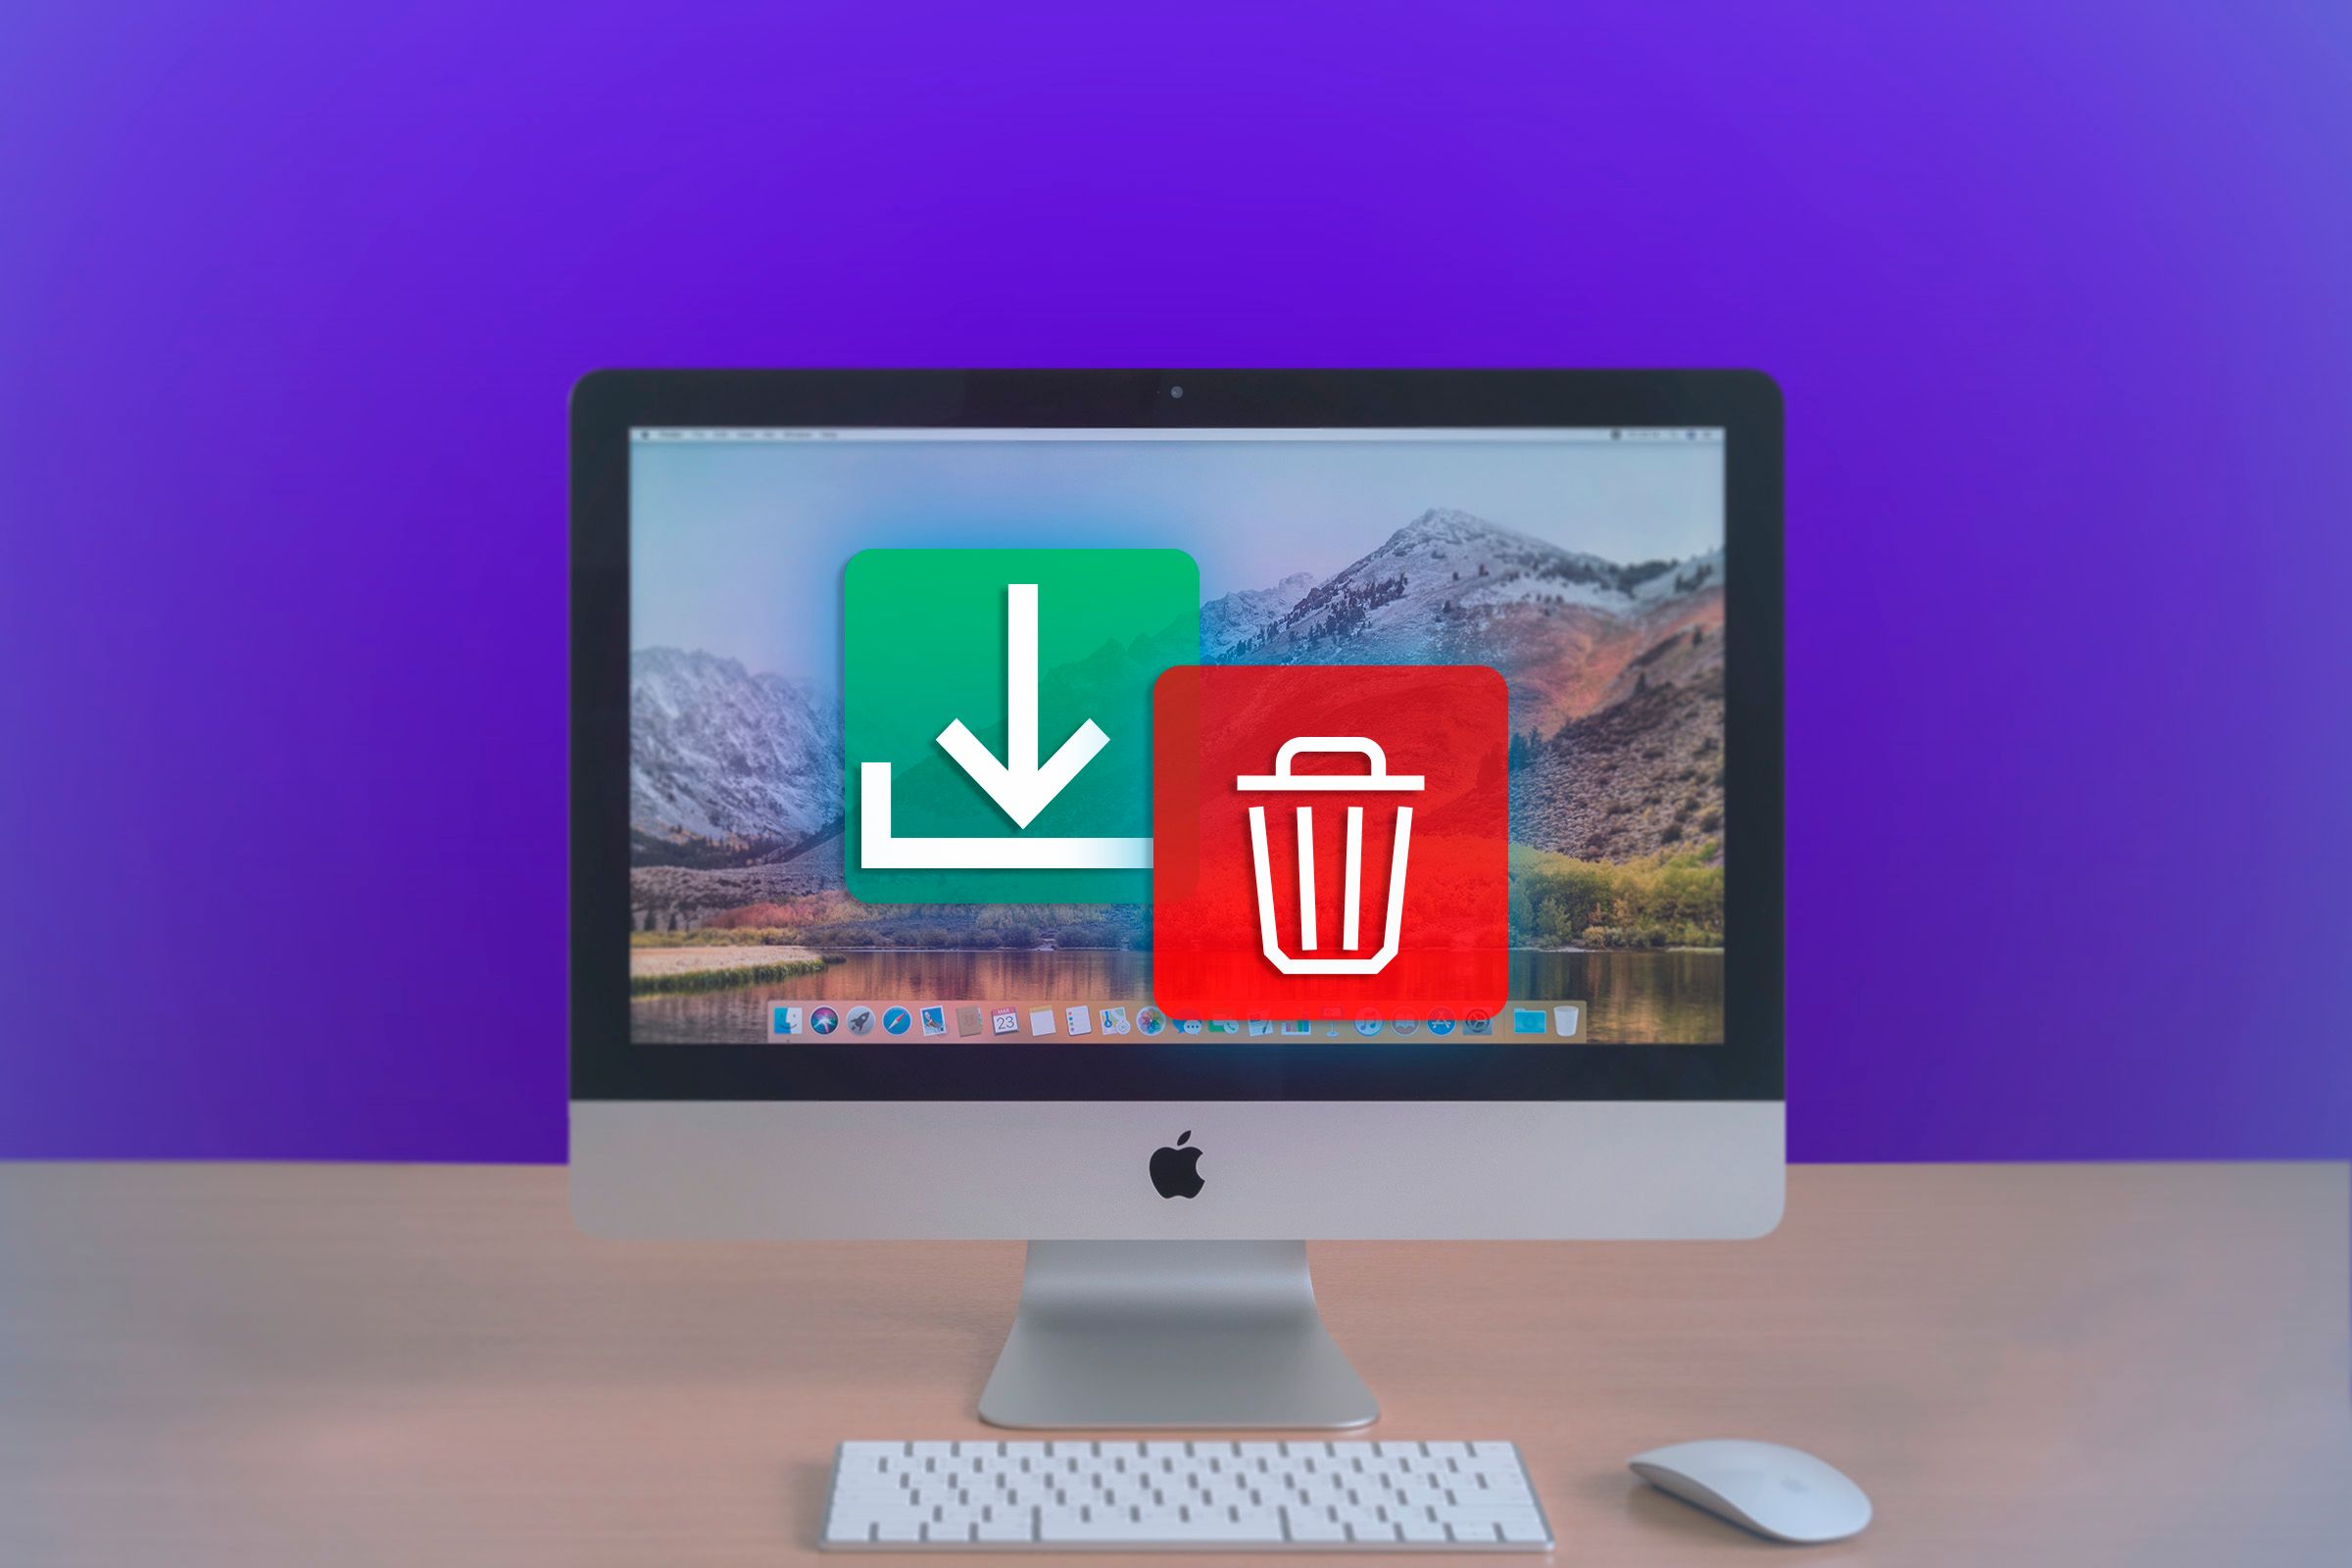 An iMac with a download icon on the left and a trash icon on the right.